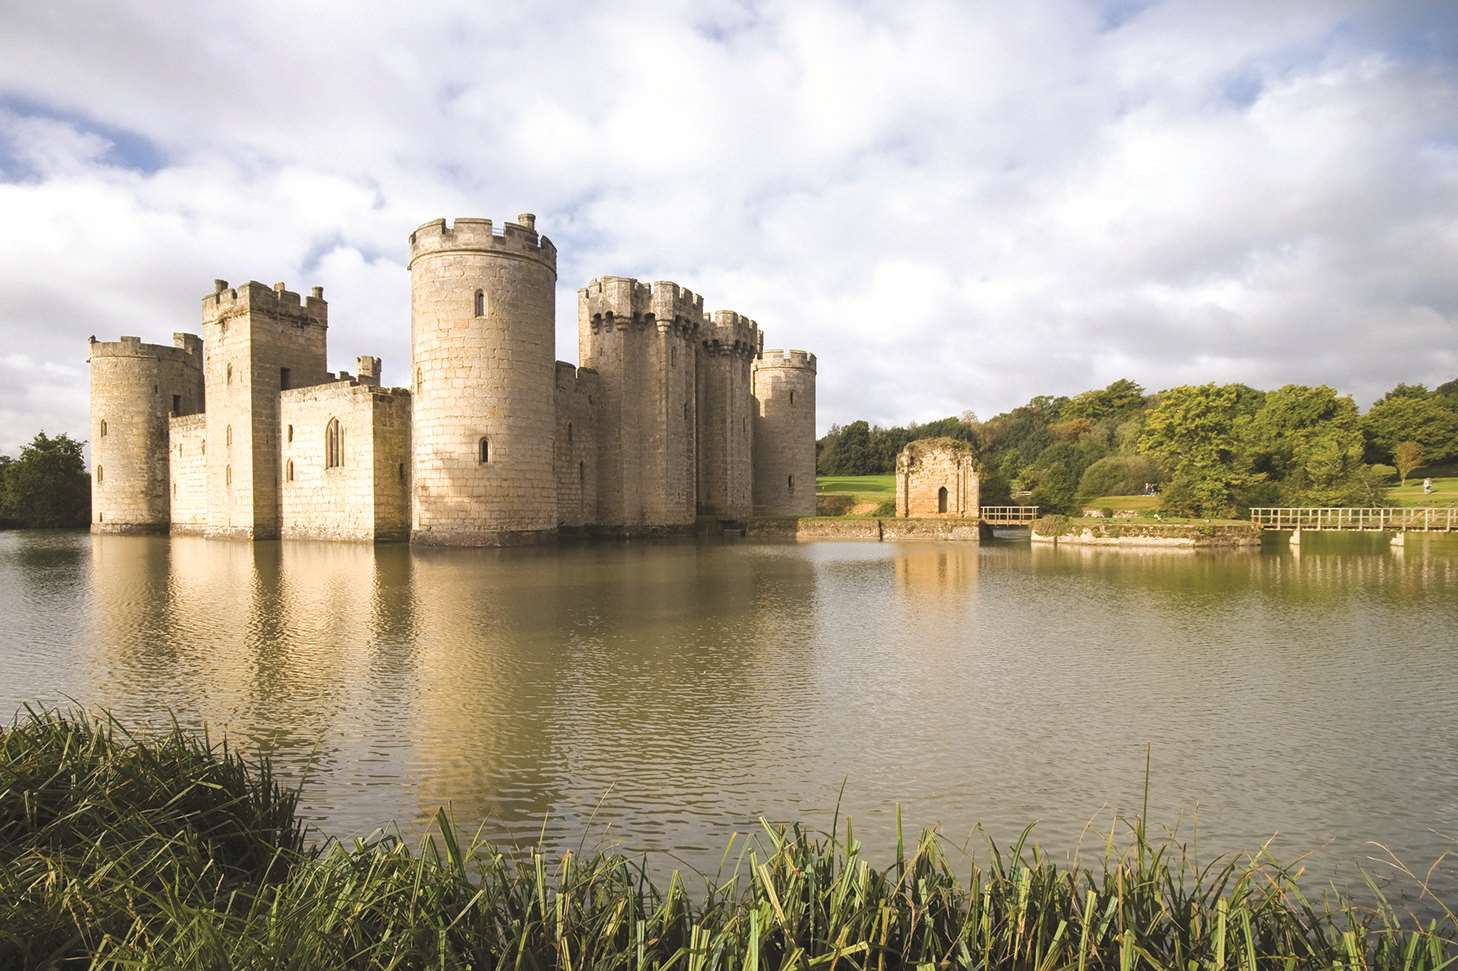 Bodiam Castle is a picturesque place to go walking